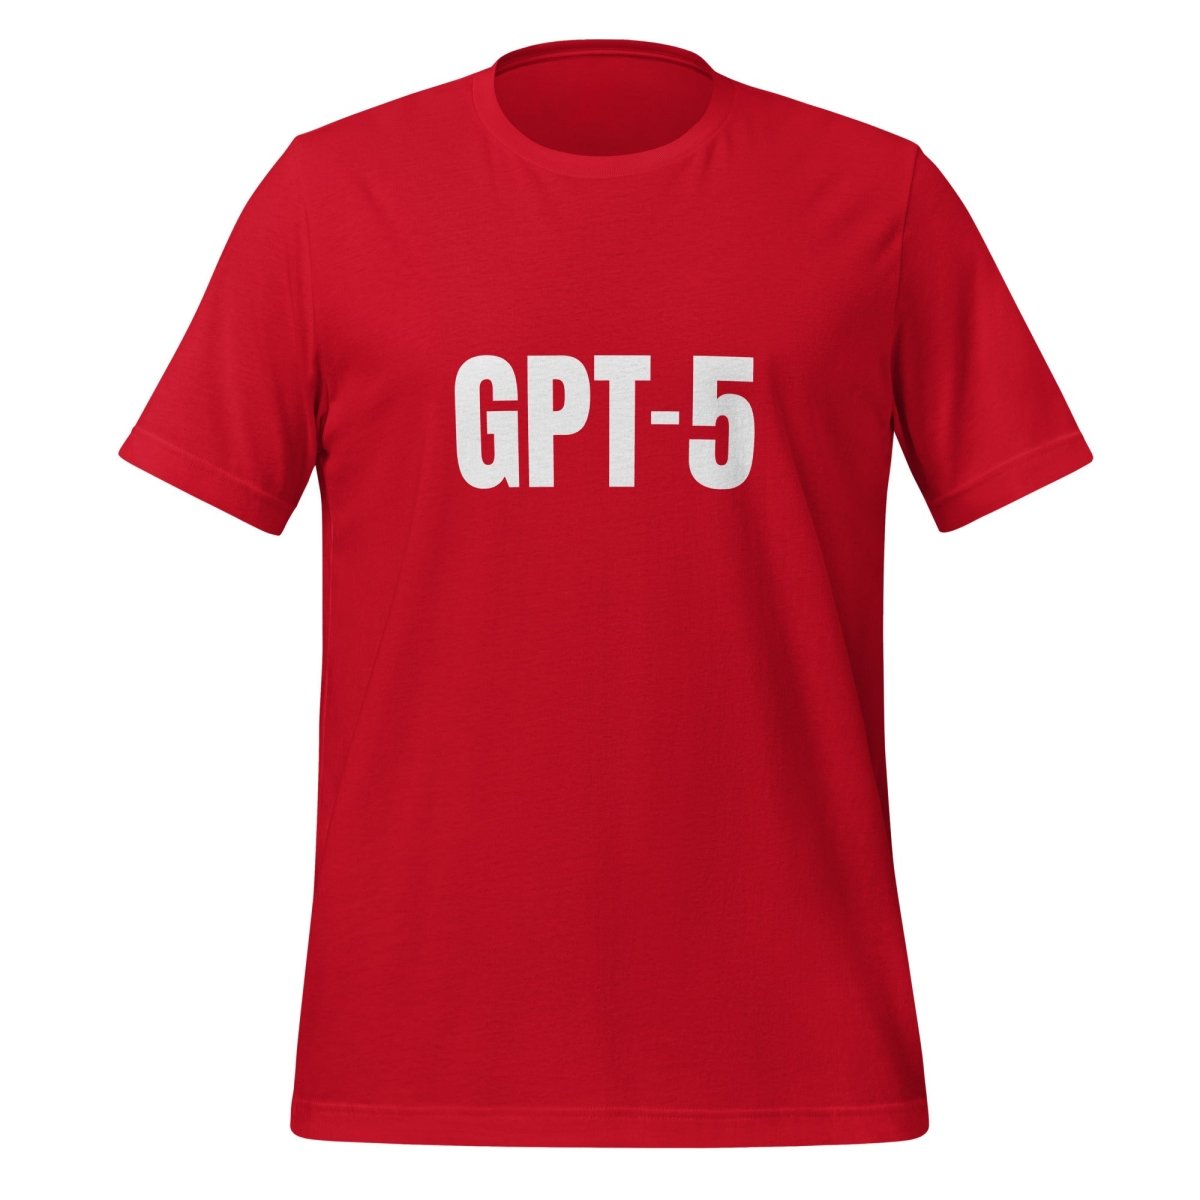 GPT - 5 T - Shirt 1 (unisex) - Red - AI Store